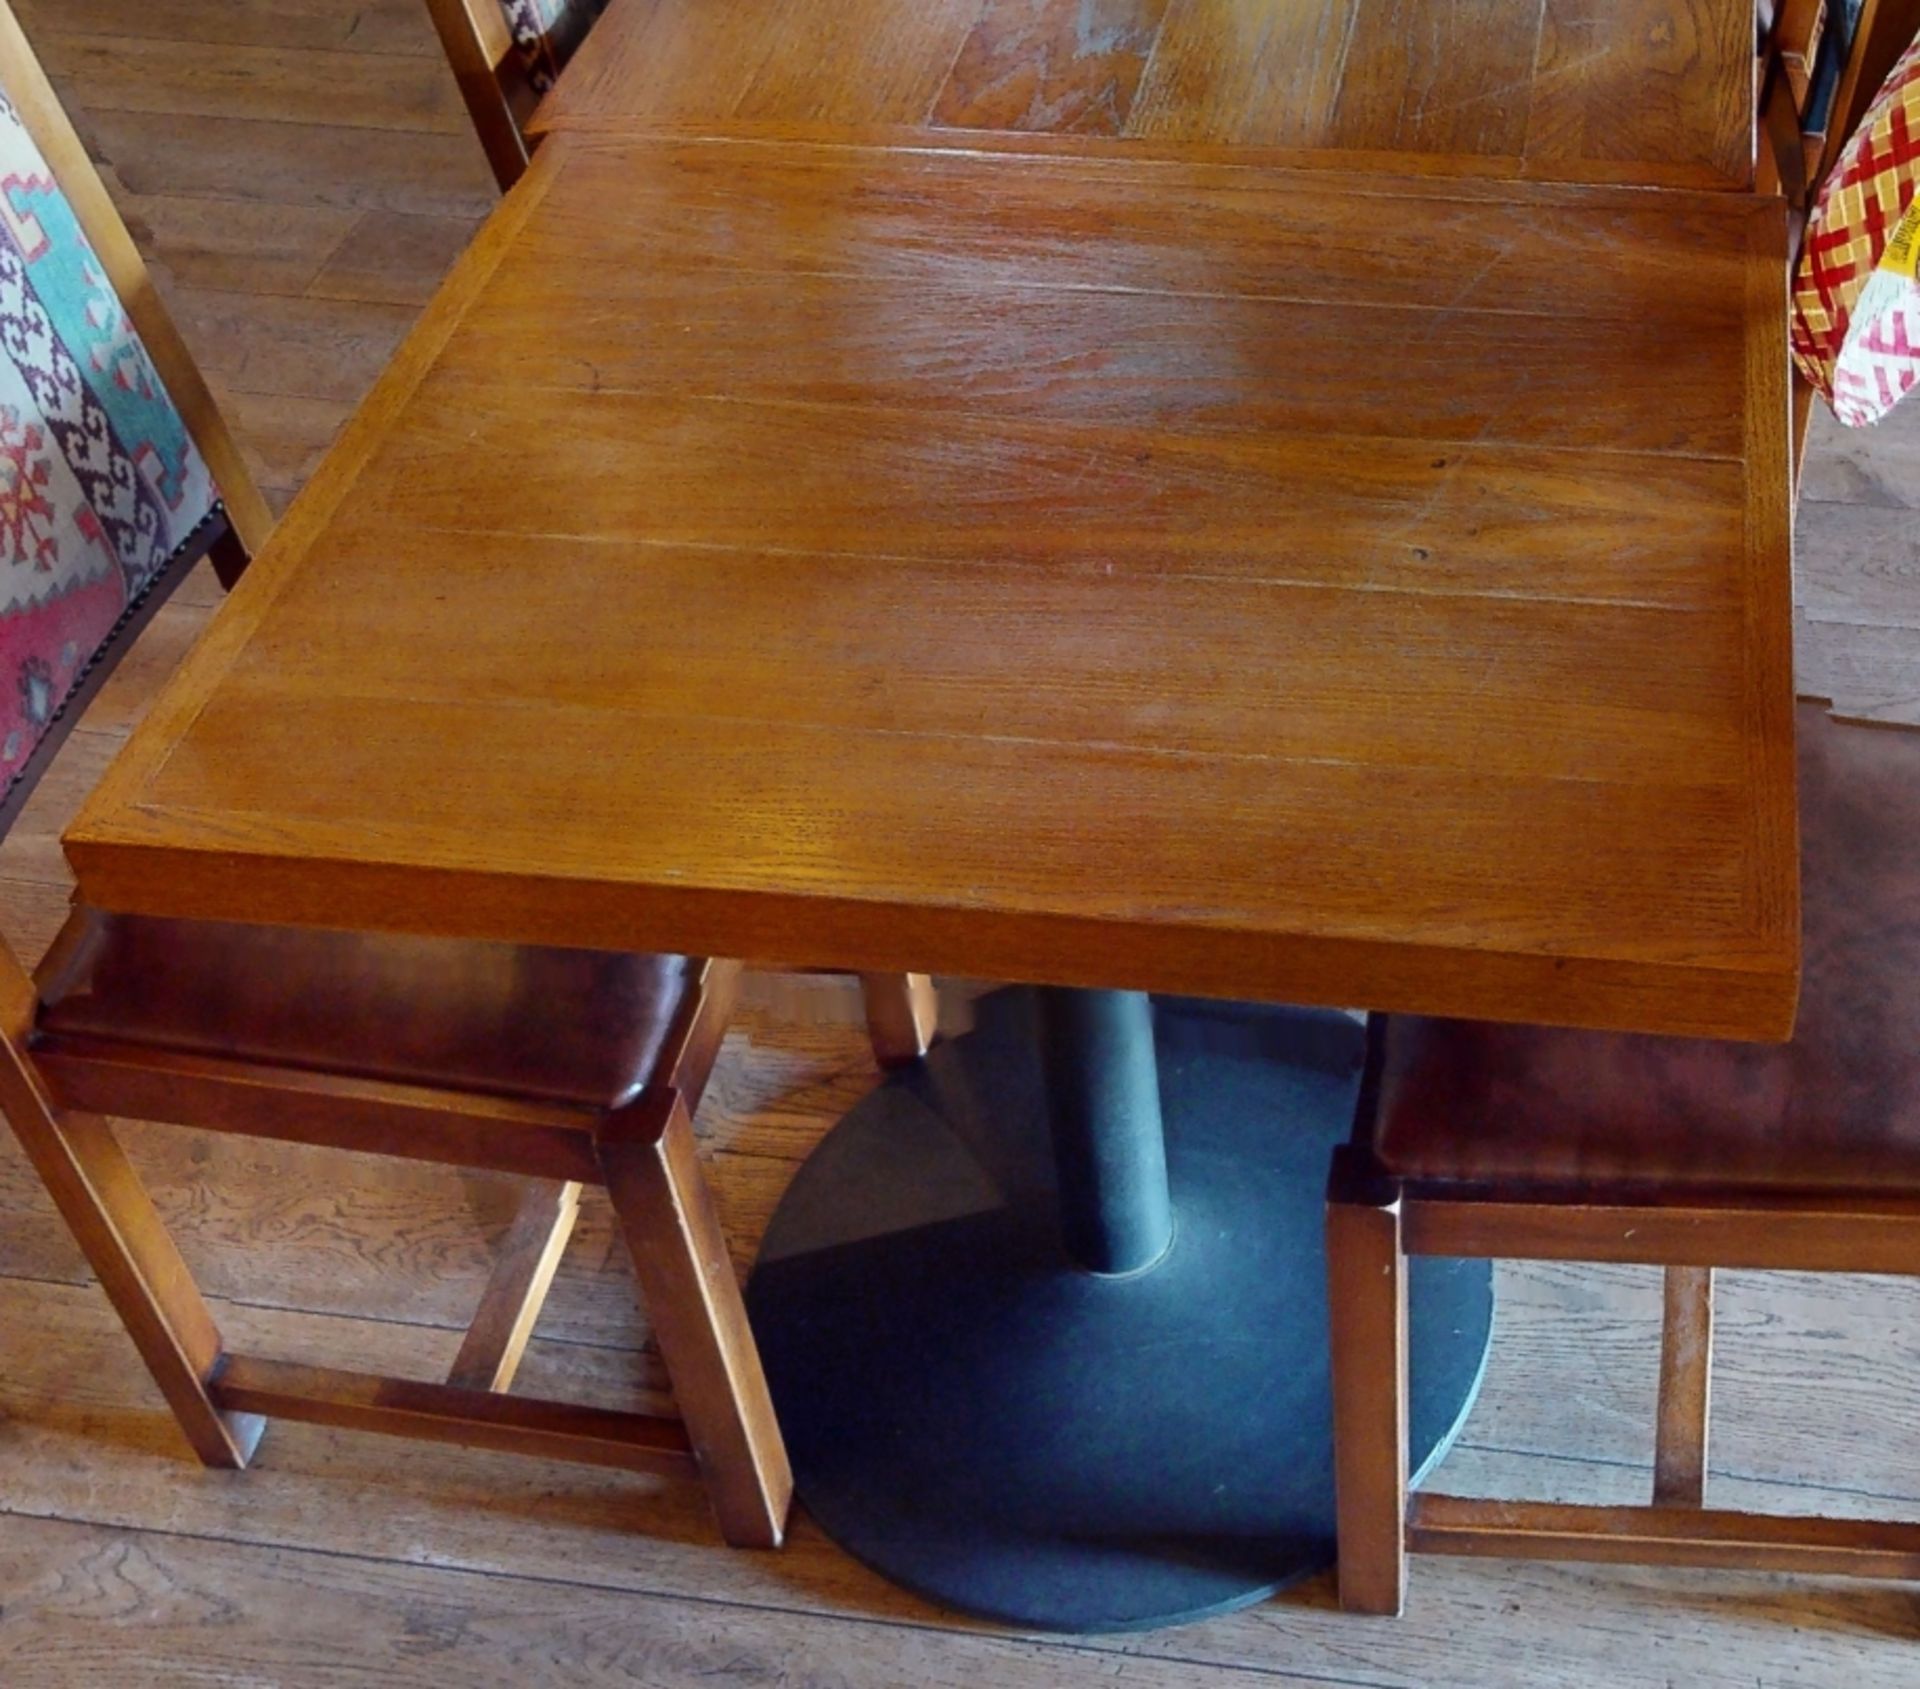 2 x Two Seater Restaurant Dining Tables With Cast Iron Bases and Wood Panelled Design Tops With - Image 6 of 6